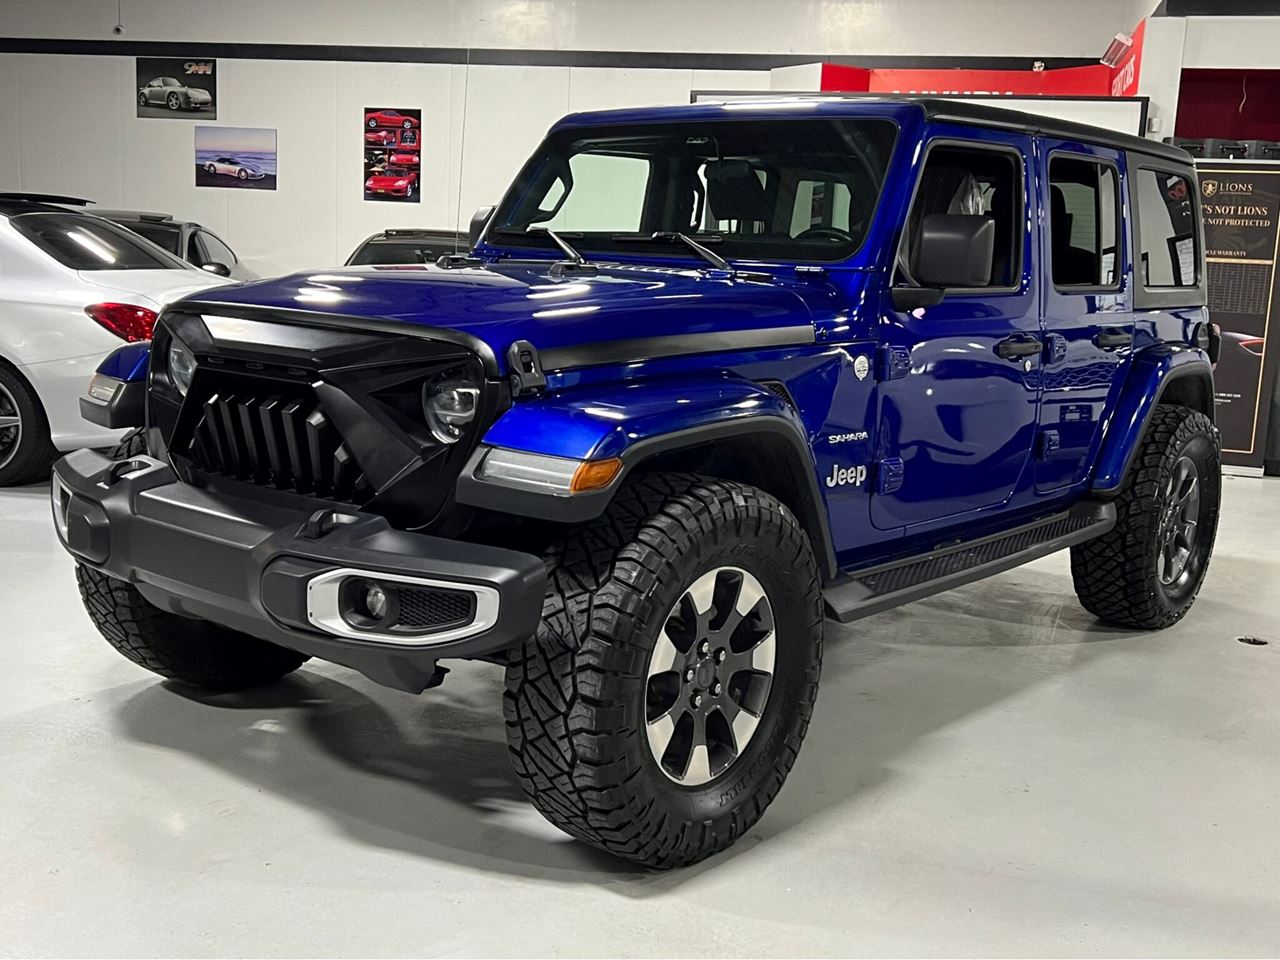 2018 Jeep WRANGLER UNLIMITED